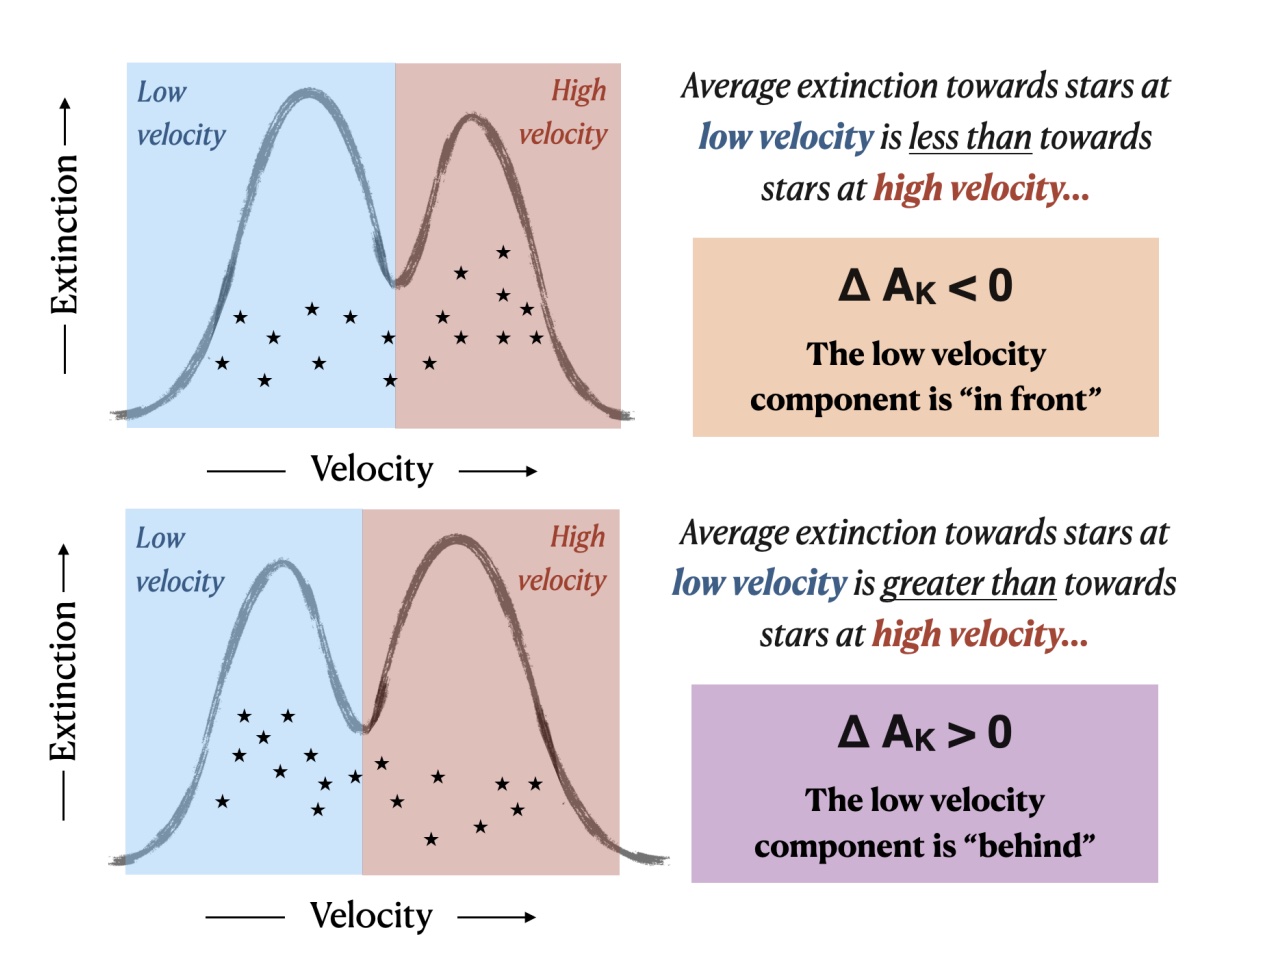 A cartoon schematic of the differential extinction estimation process, used to determine whether stars with low velocity are in front of, or behind, stars with high velocity.